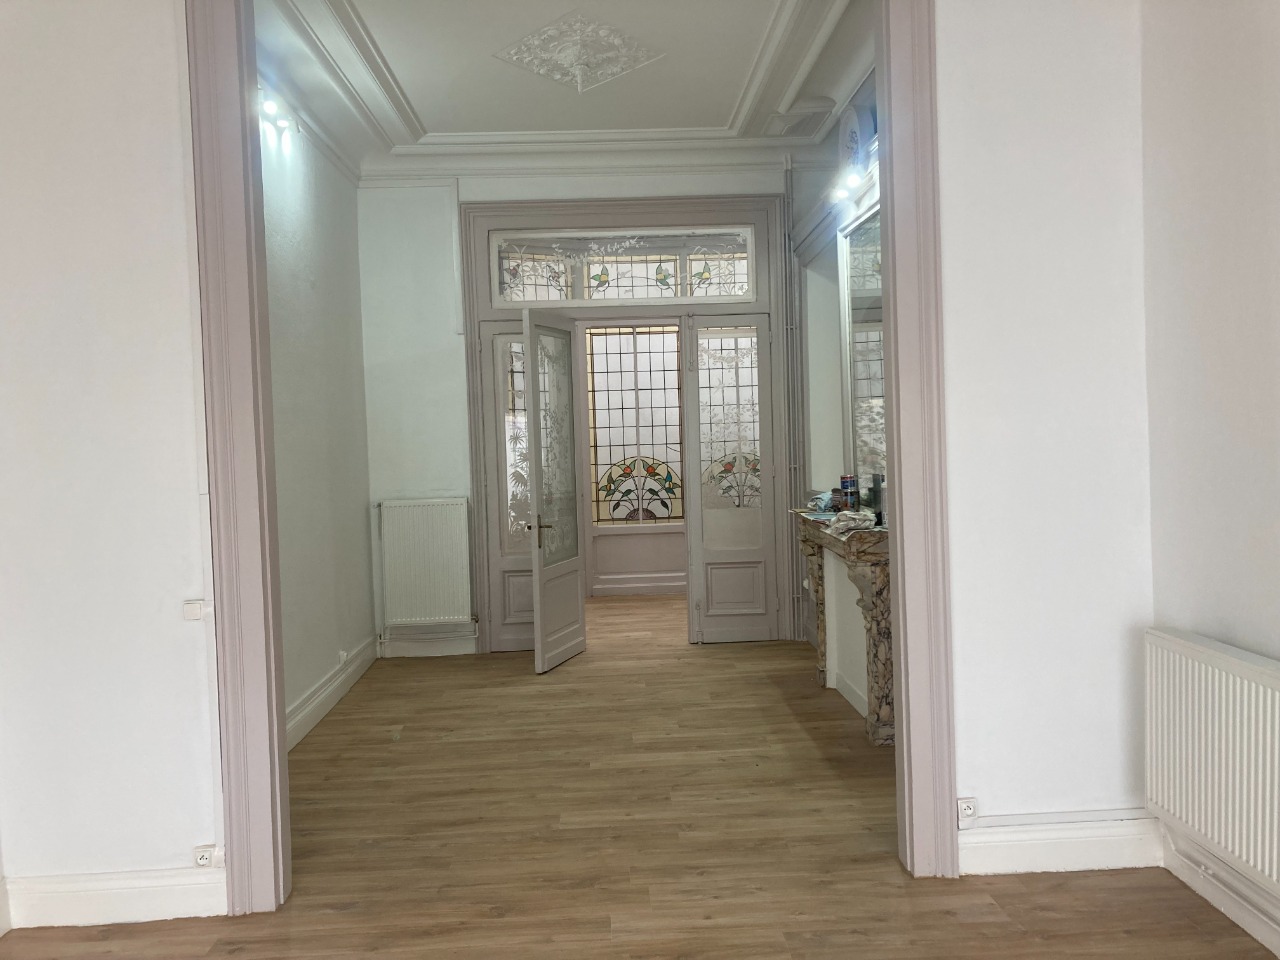 Location maison 59000 Lille - Lille local commercial